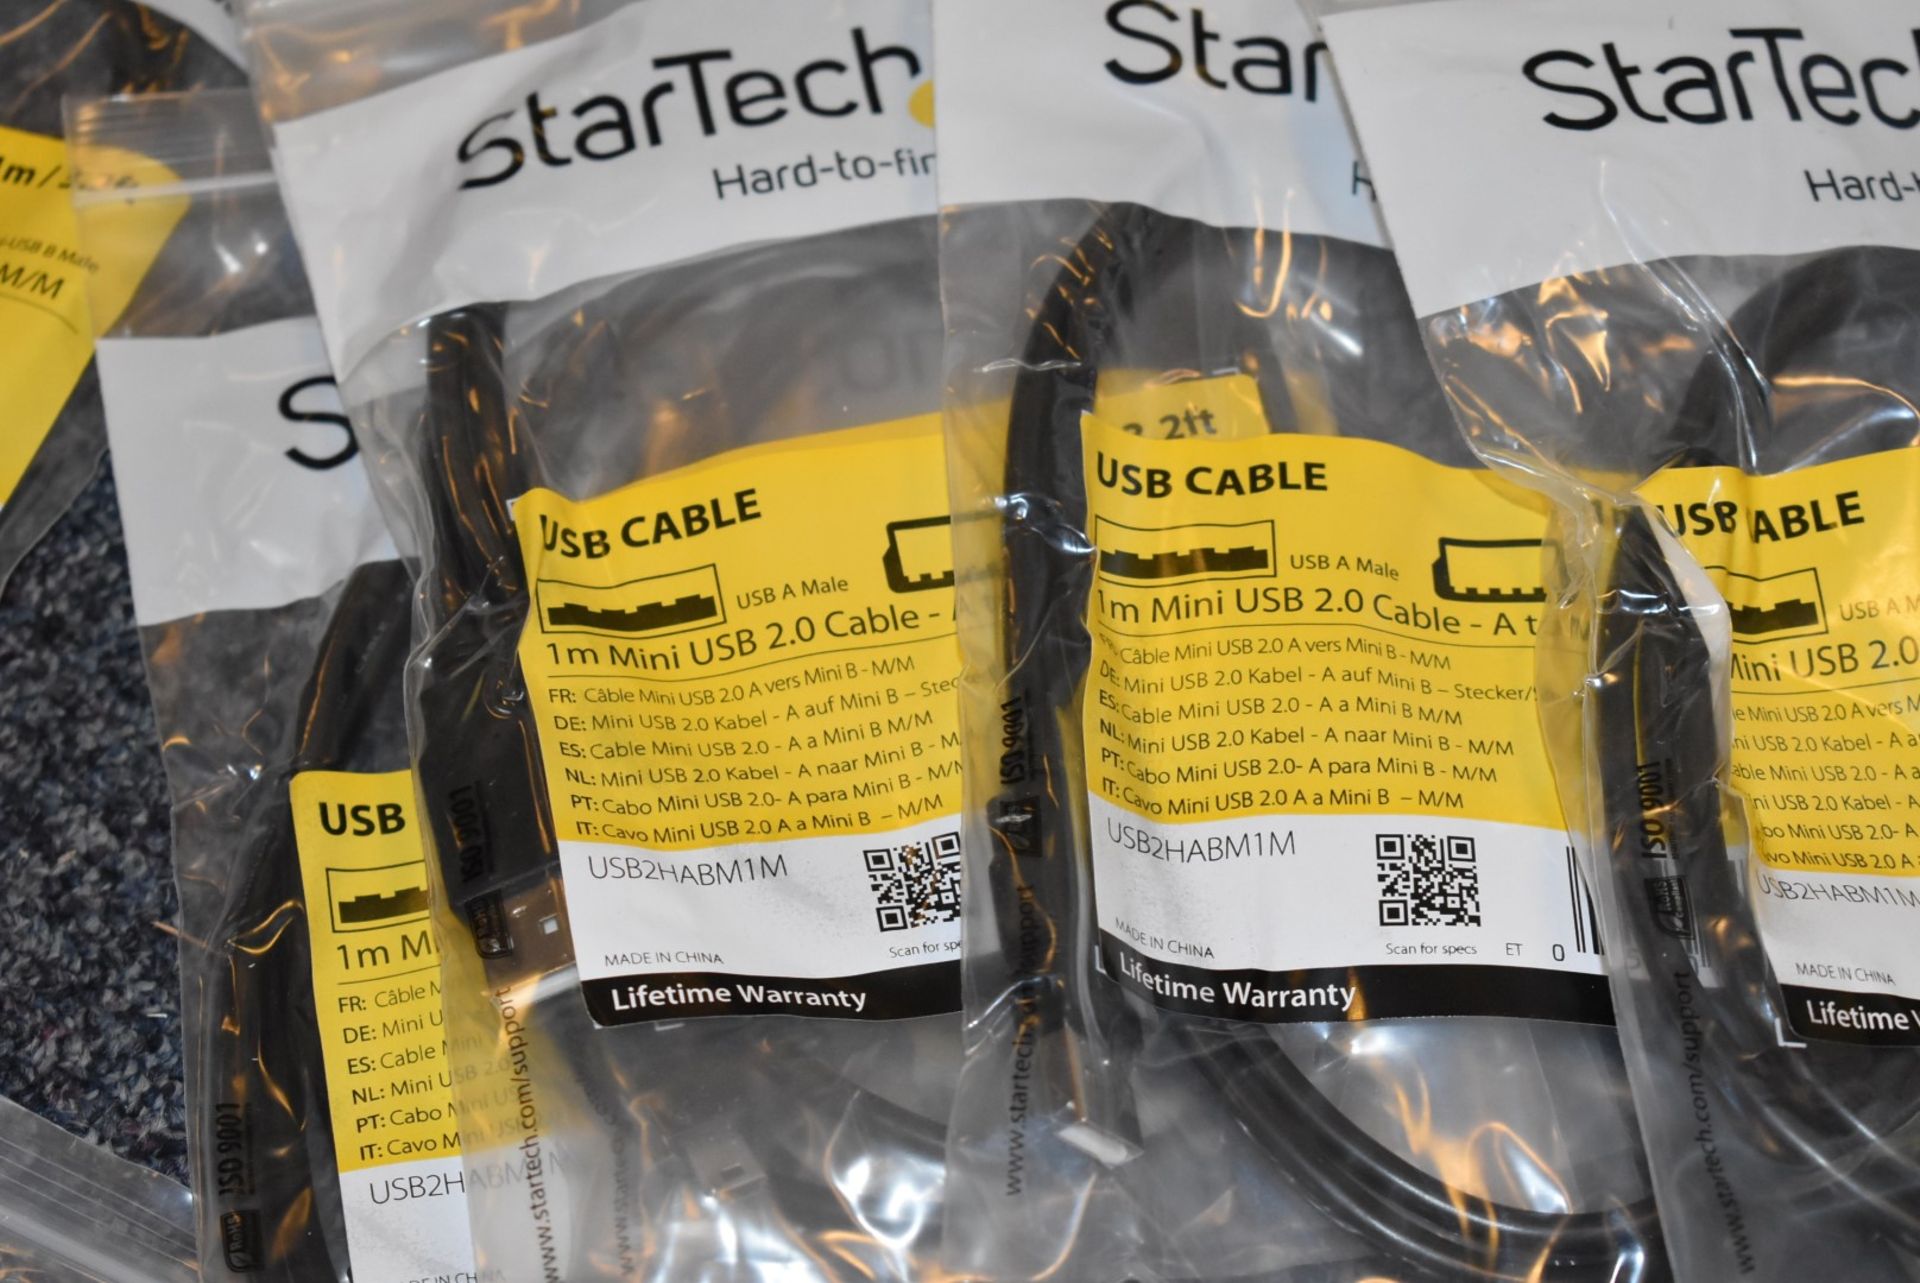 177 x Assorted StarTech Cables - Huge Lot in Original Packing - Various Cables Included - Image 13 of 50